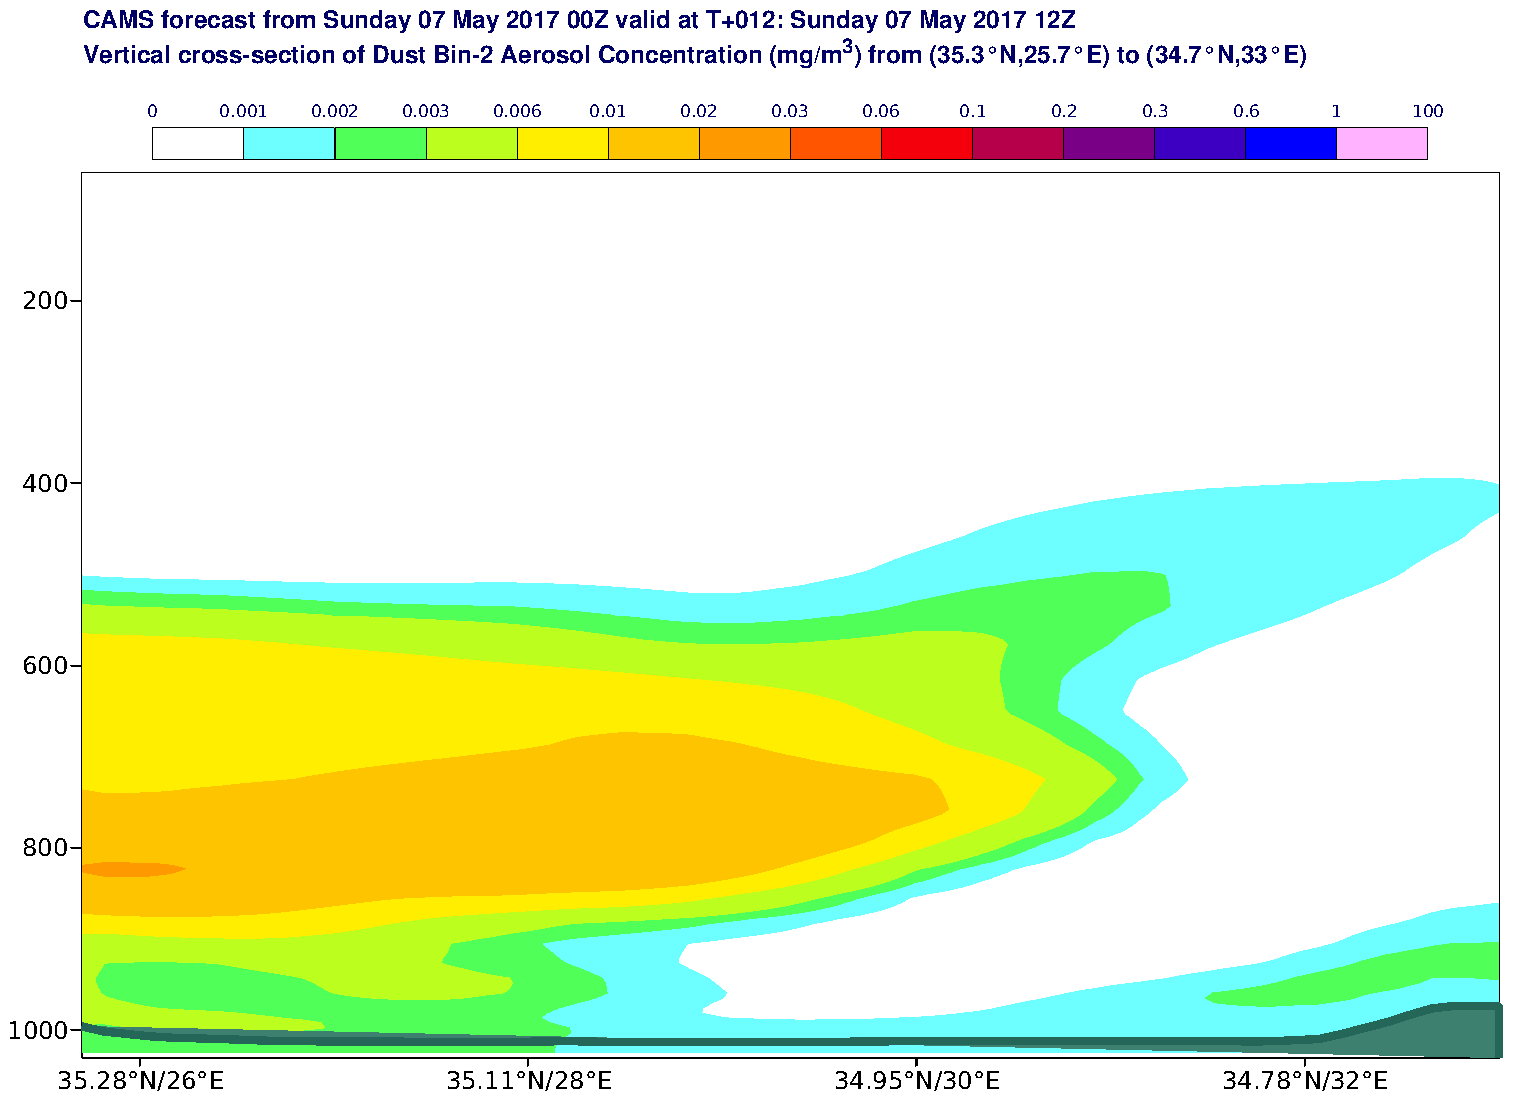 Vertical cross-section of Dust Bin-2 Aerosol Concentration (mg/m3) valid at T12 - 2017-05-07 12:00